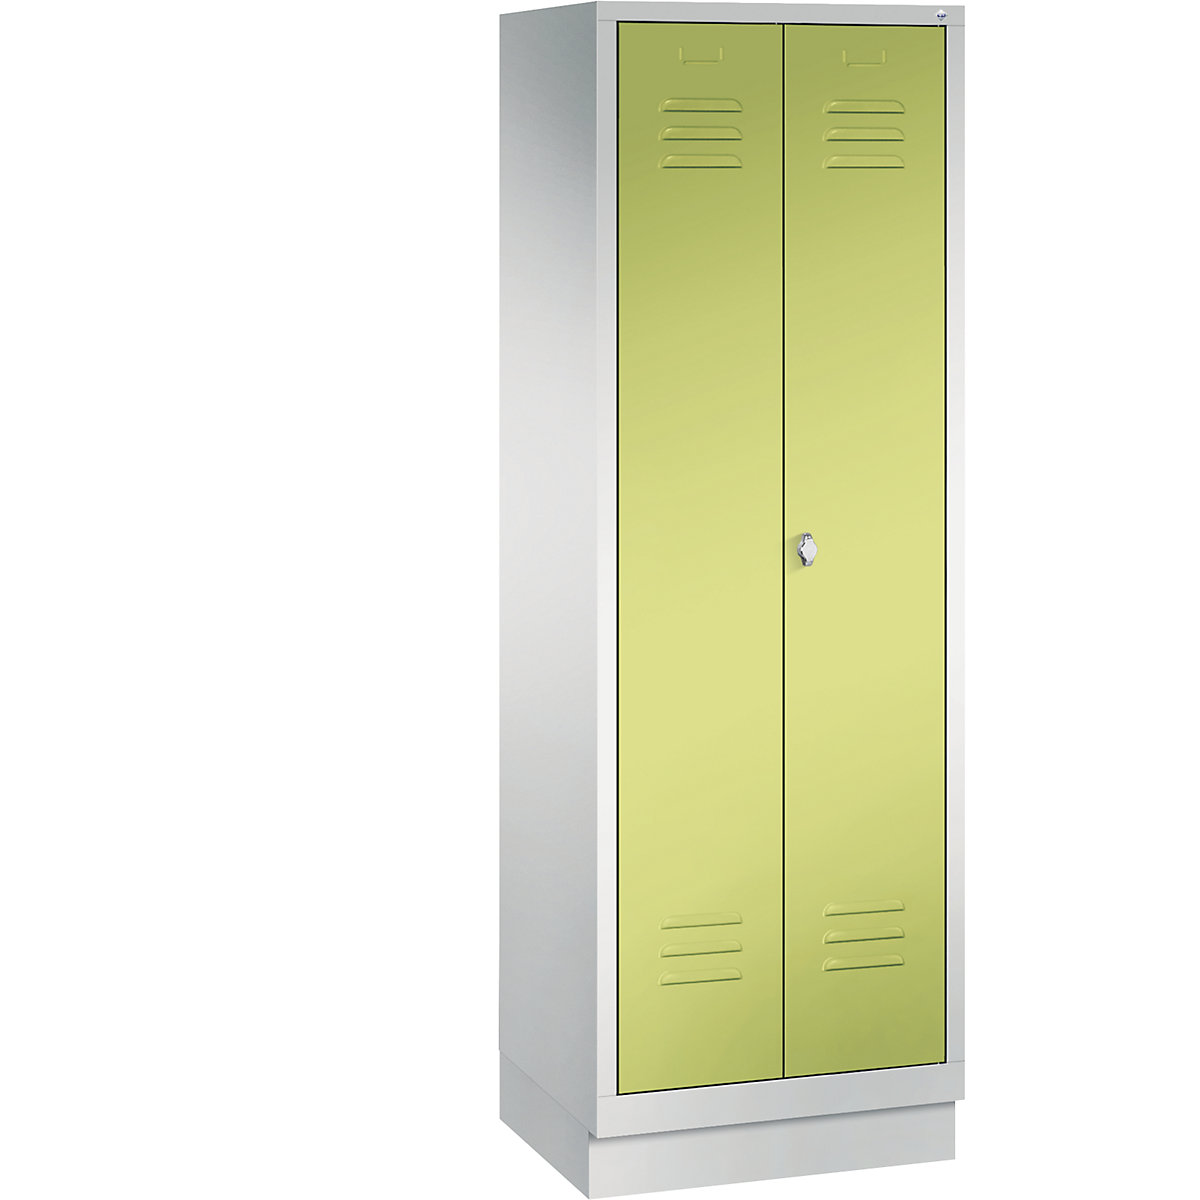 CLASSIC cloakroom locker with plinth, doors close in the middle – C+P, 2 compartments, compartment width 300 mm, light grey / viridian green-13